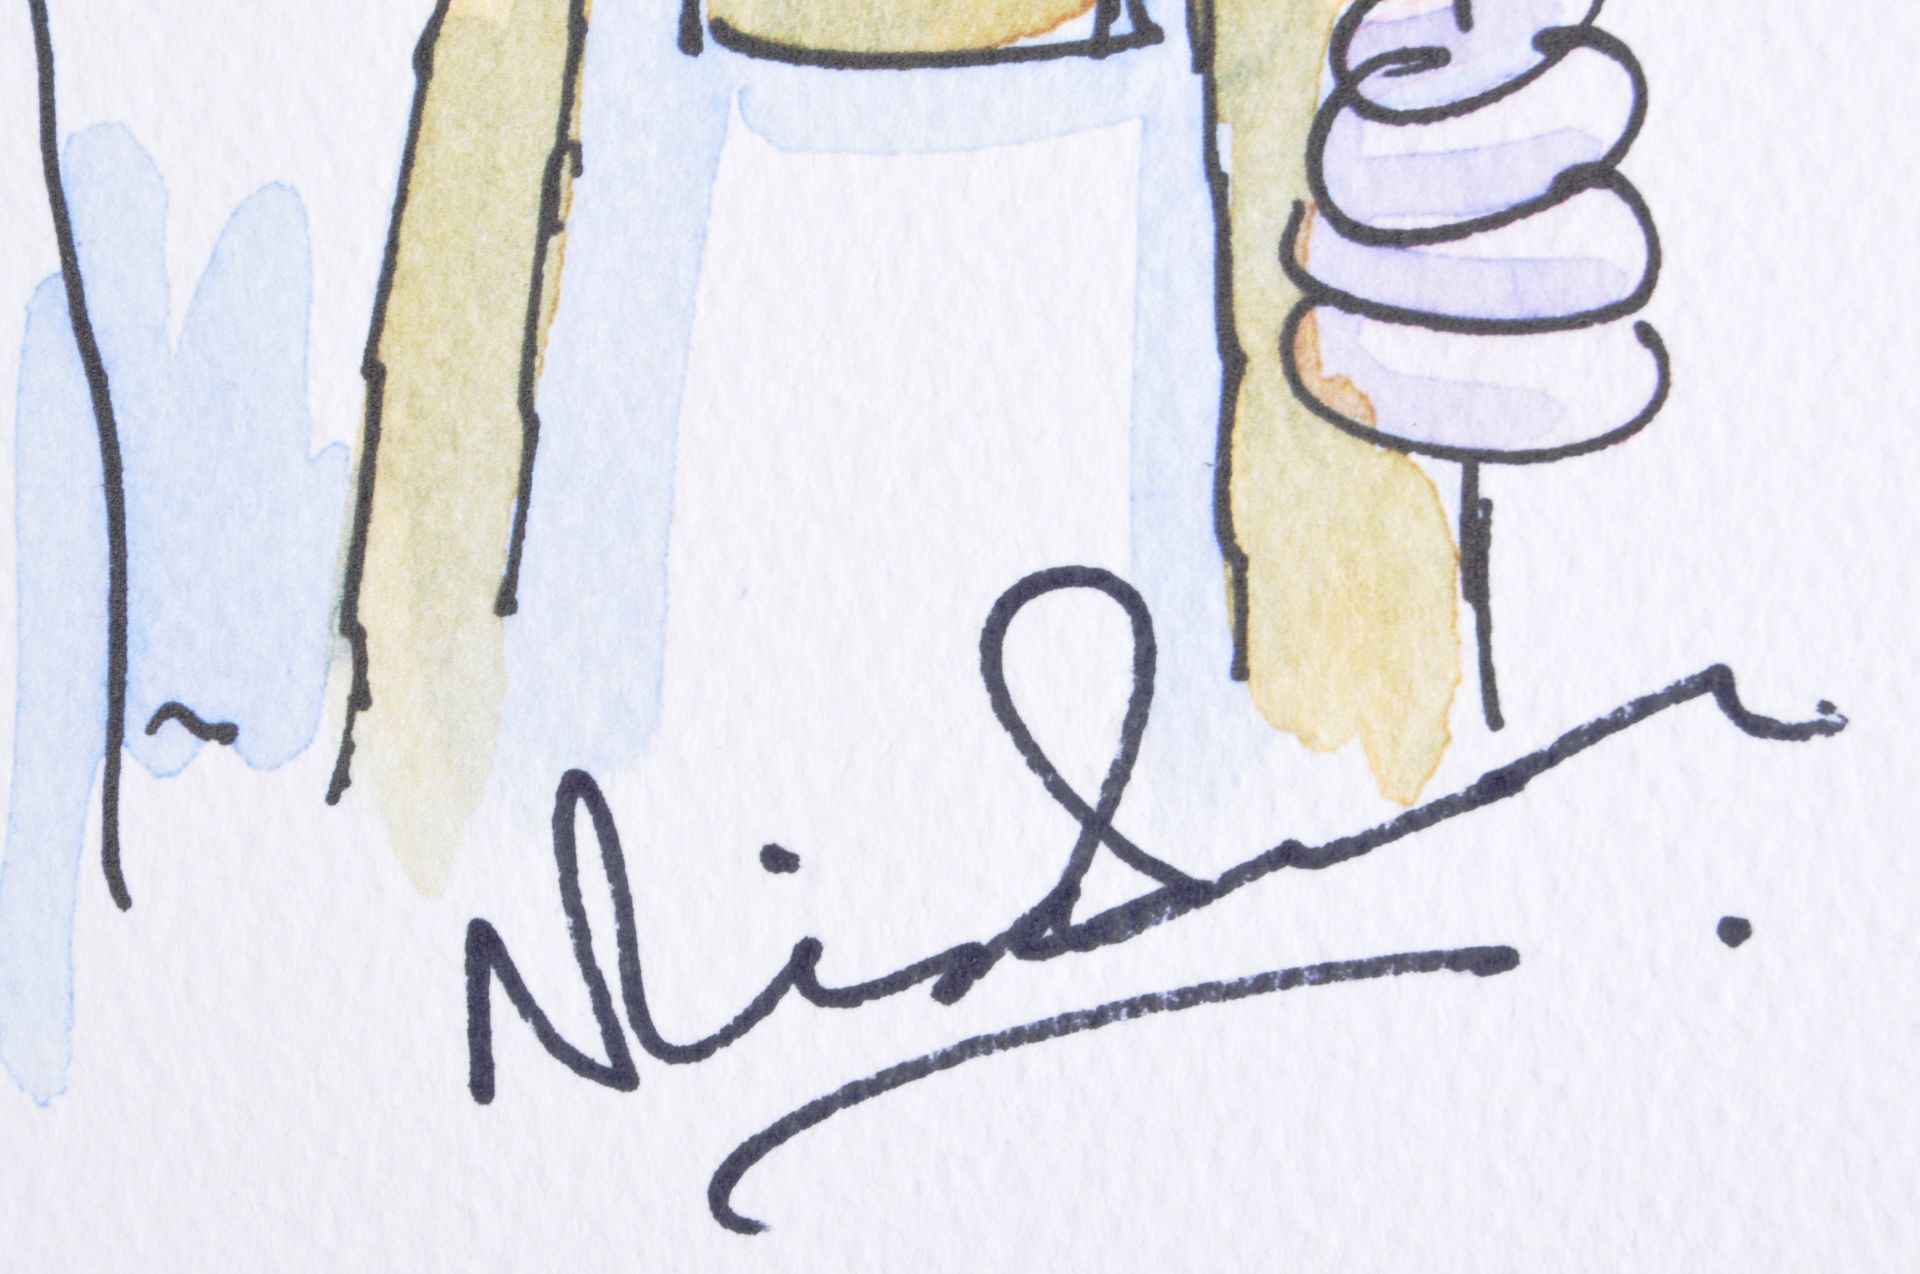 AARDMAN ANIMATIONS - WALLACE & GROMIT - NICK PARK SIGNED ARTWORK - Image 3 of 3